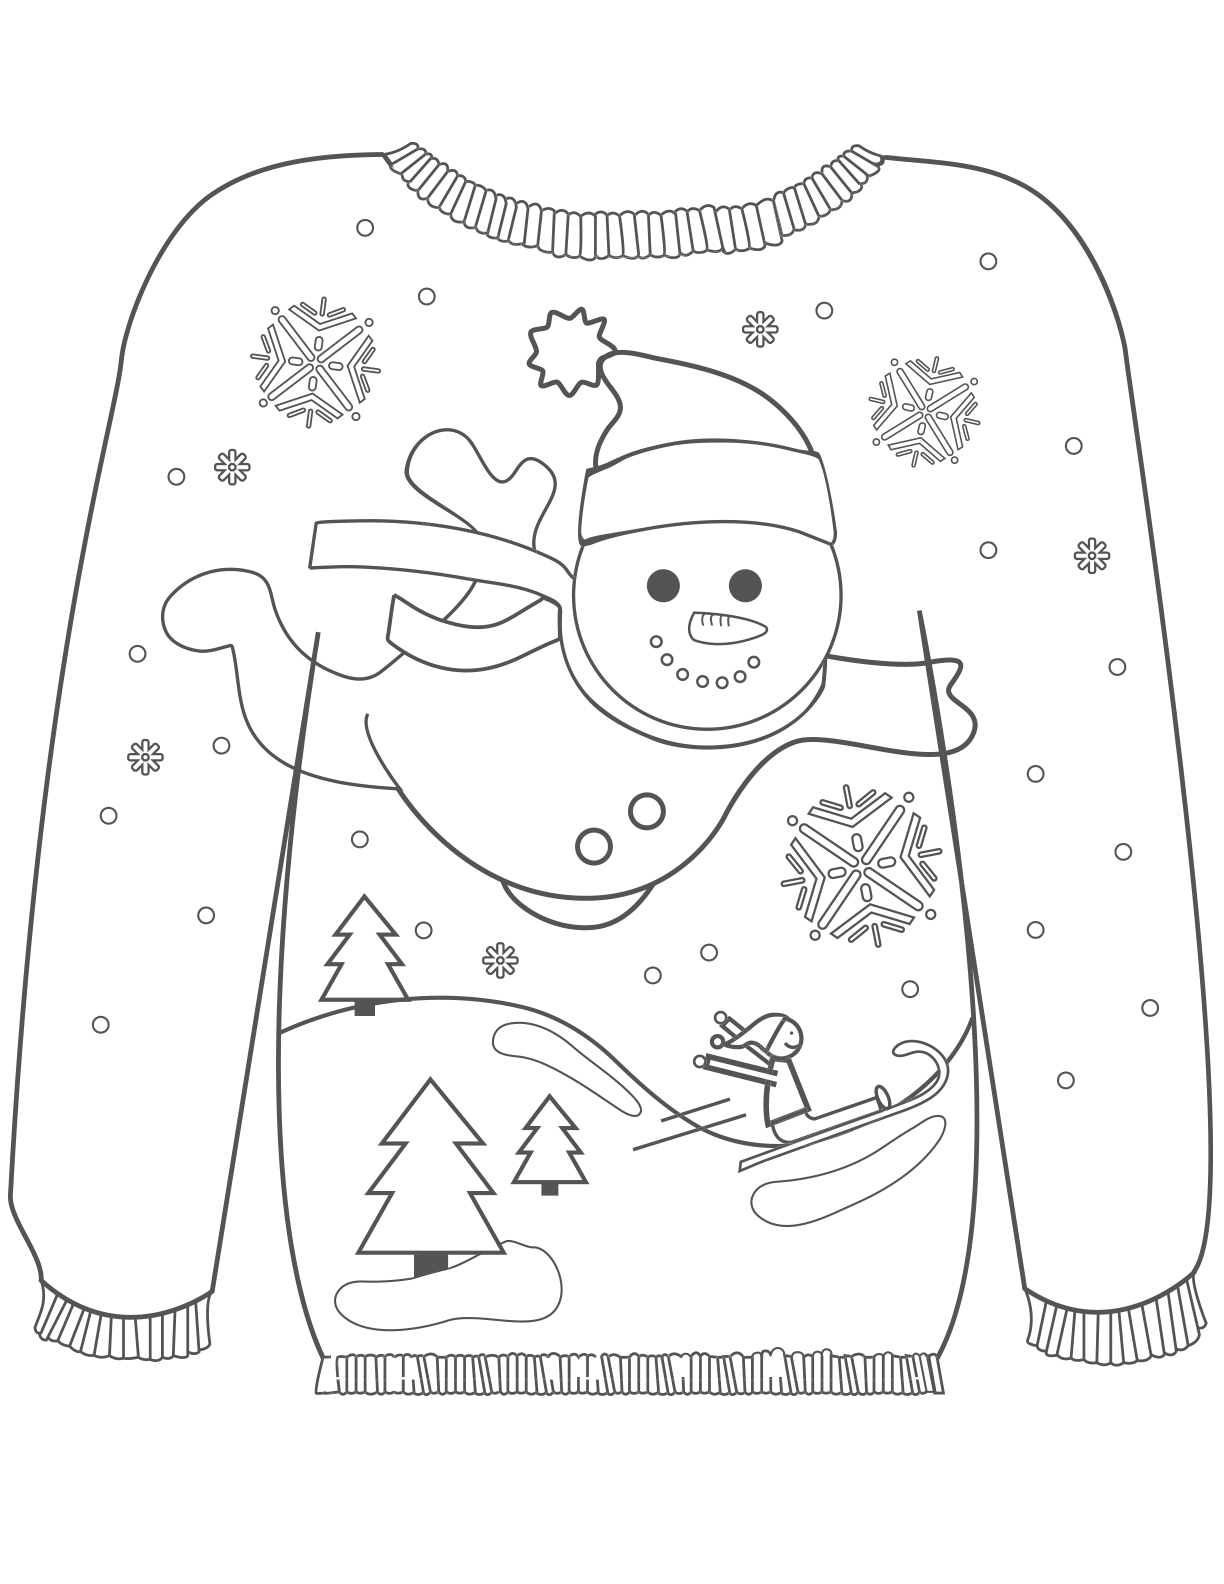 Sweater Coloring Pages - Coloring Home